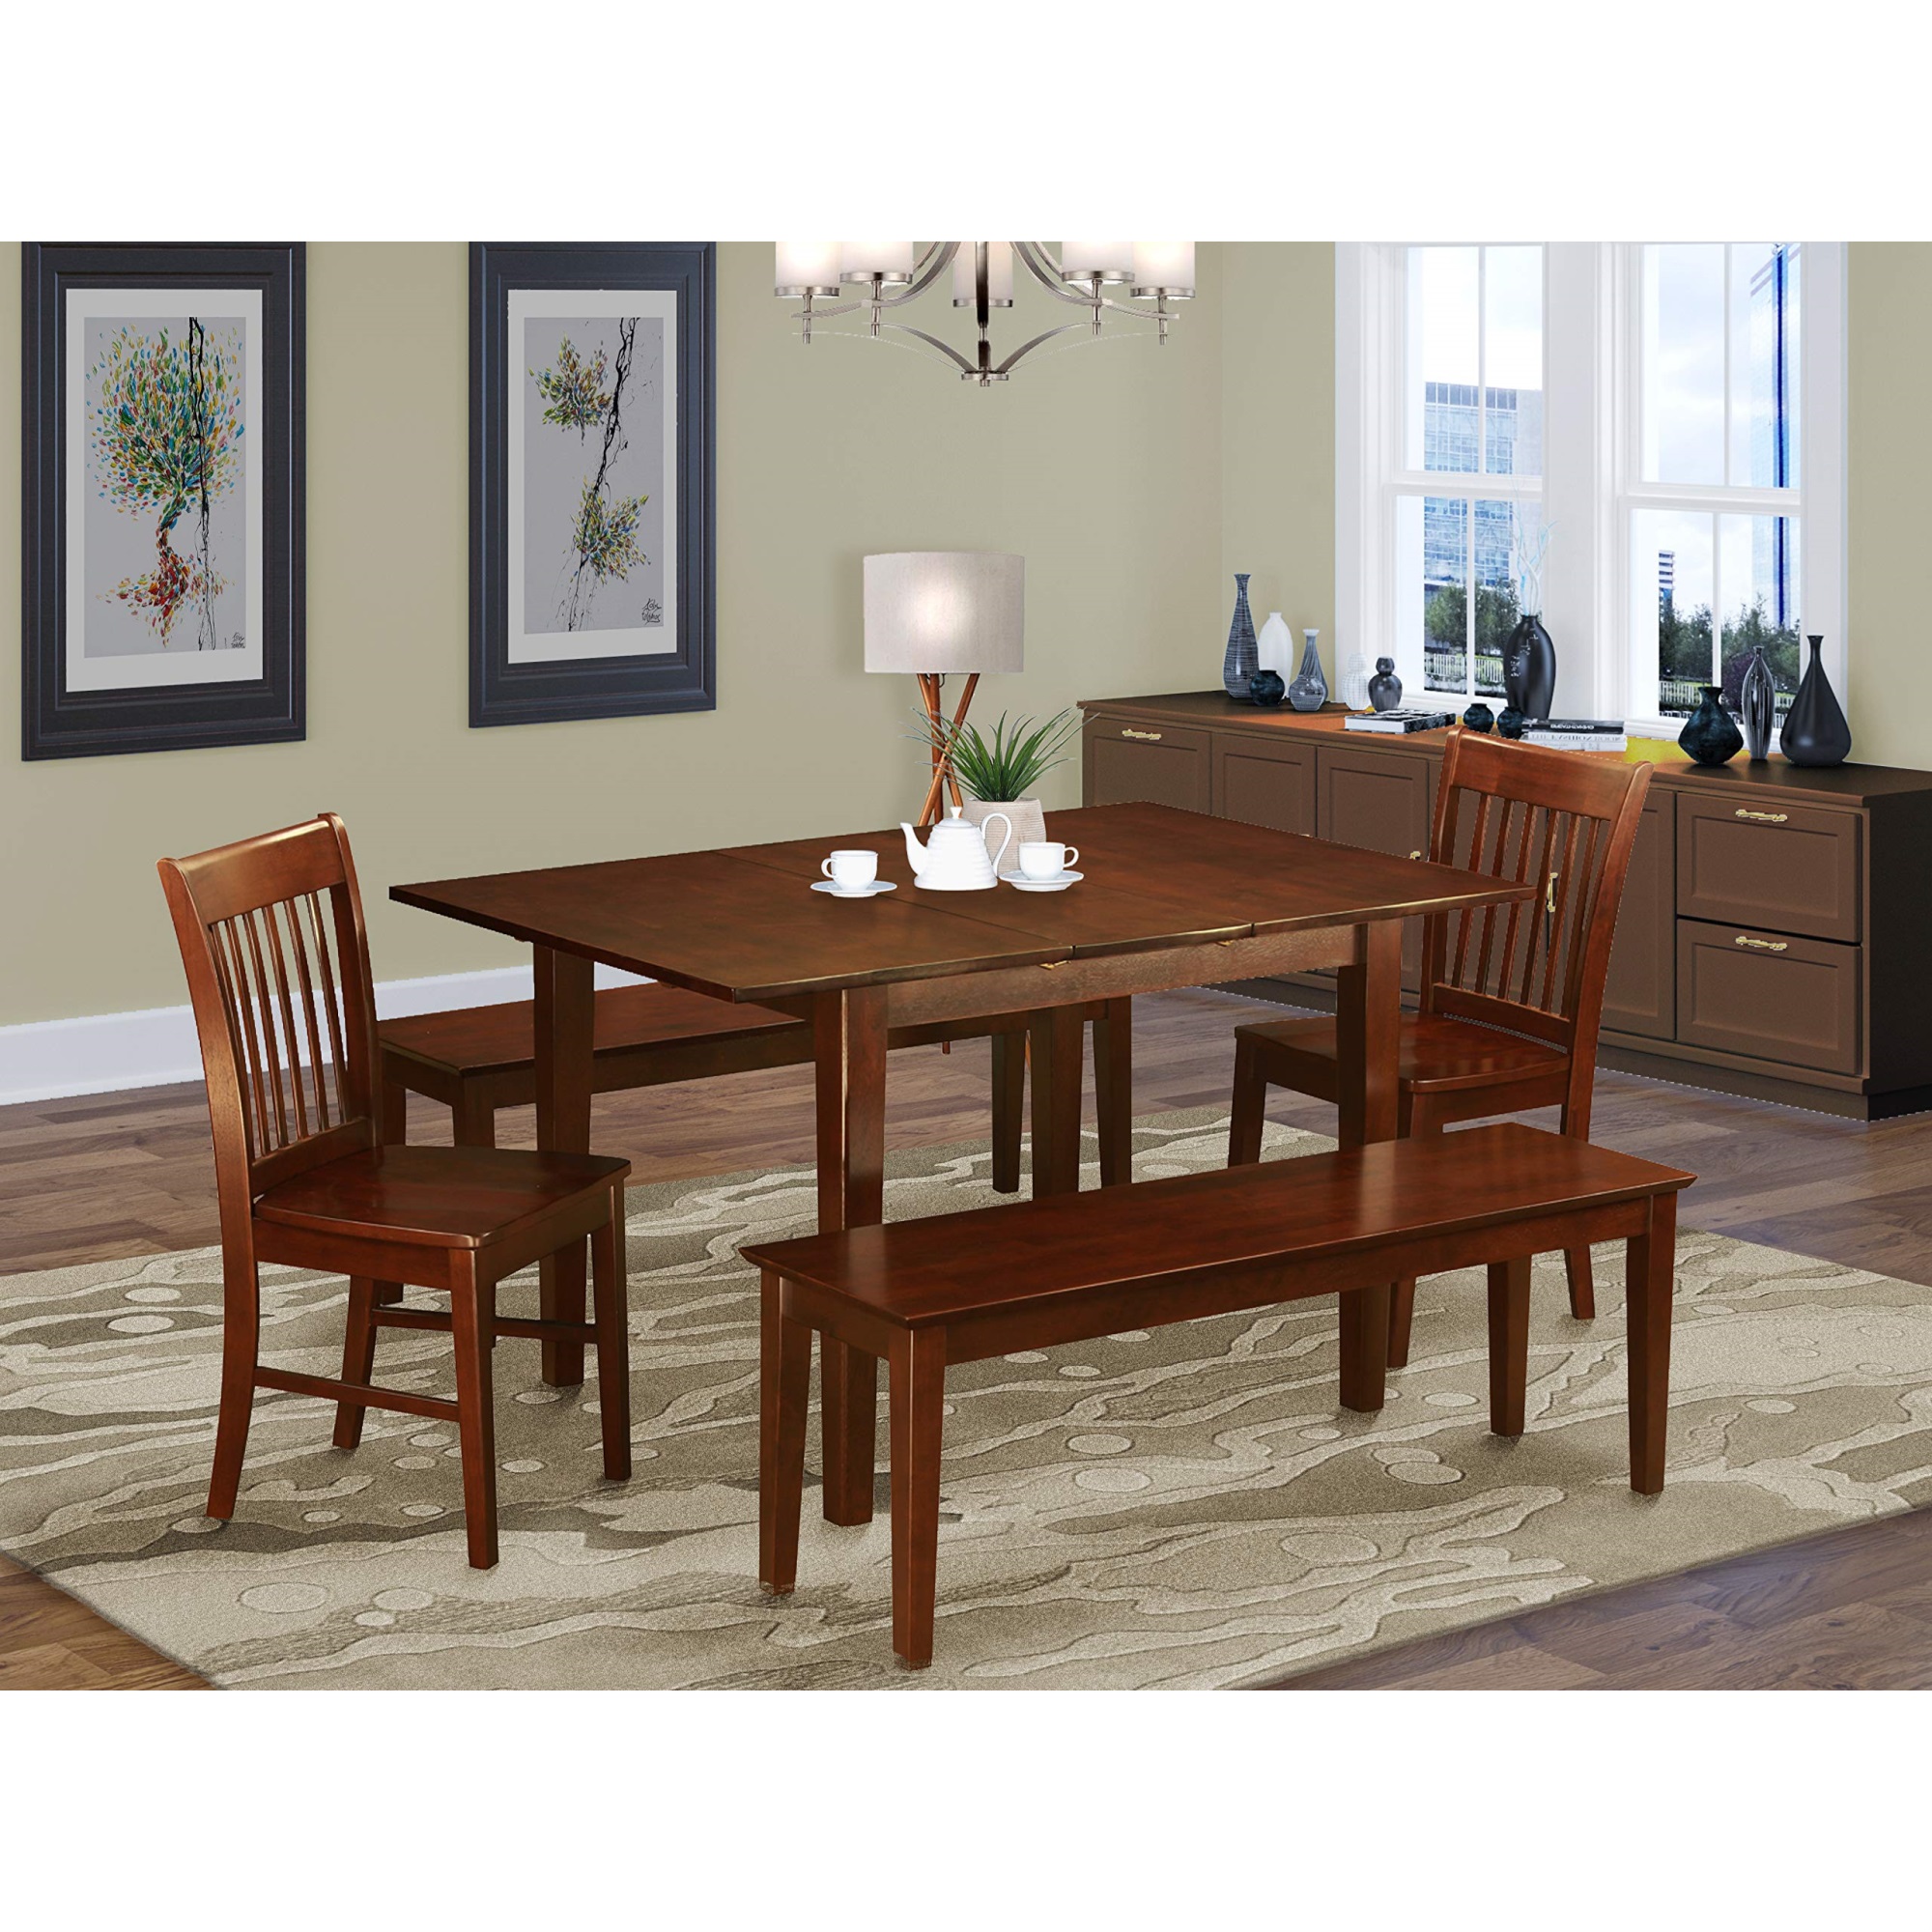 East West Furniture MLNO5C-MAH-W 5 Pc Kitchen nook Dining set-breakfast nook and 2 Dining Chairs 2 Benches